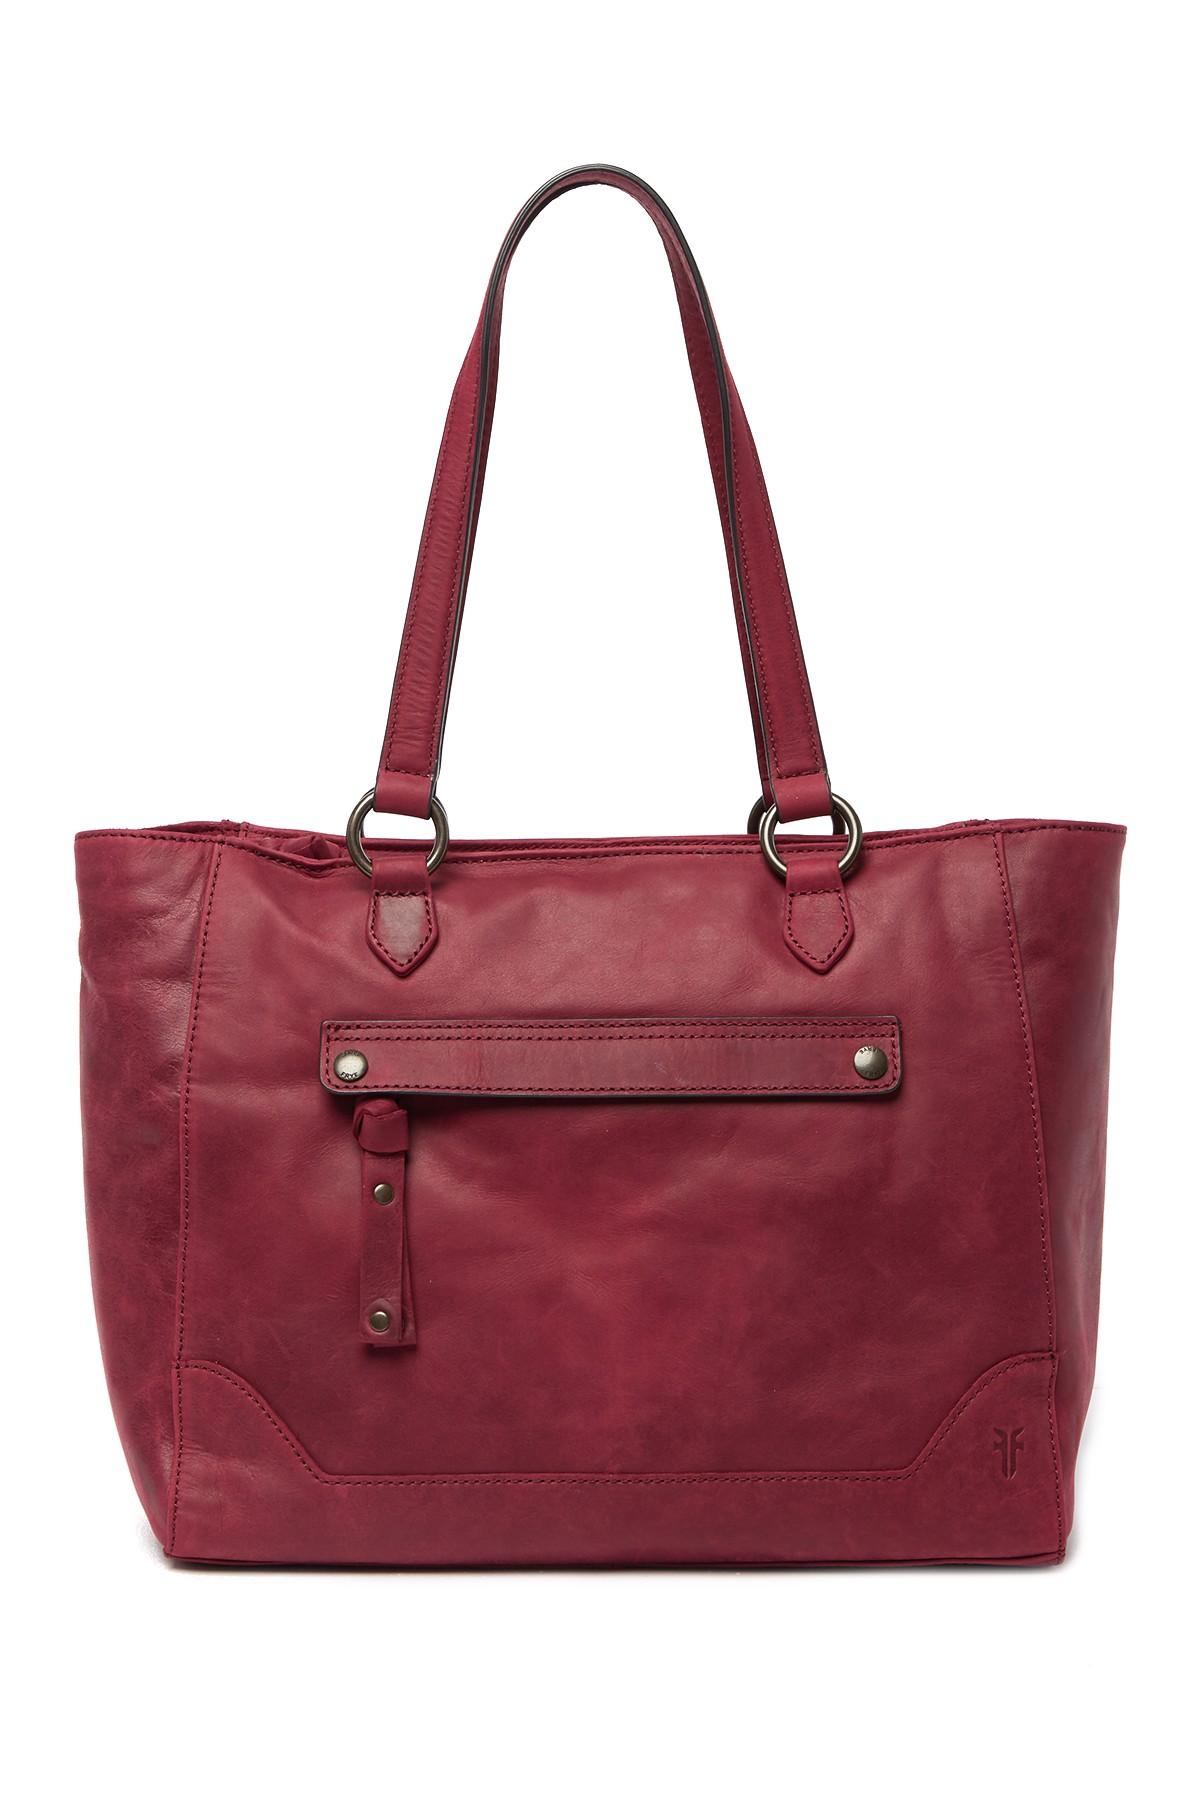 Frye Melissa Leather Tote Bag - Lyst